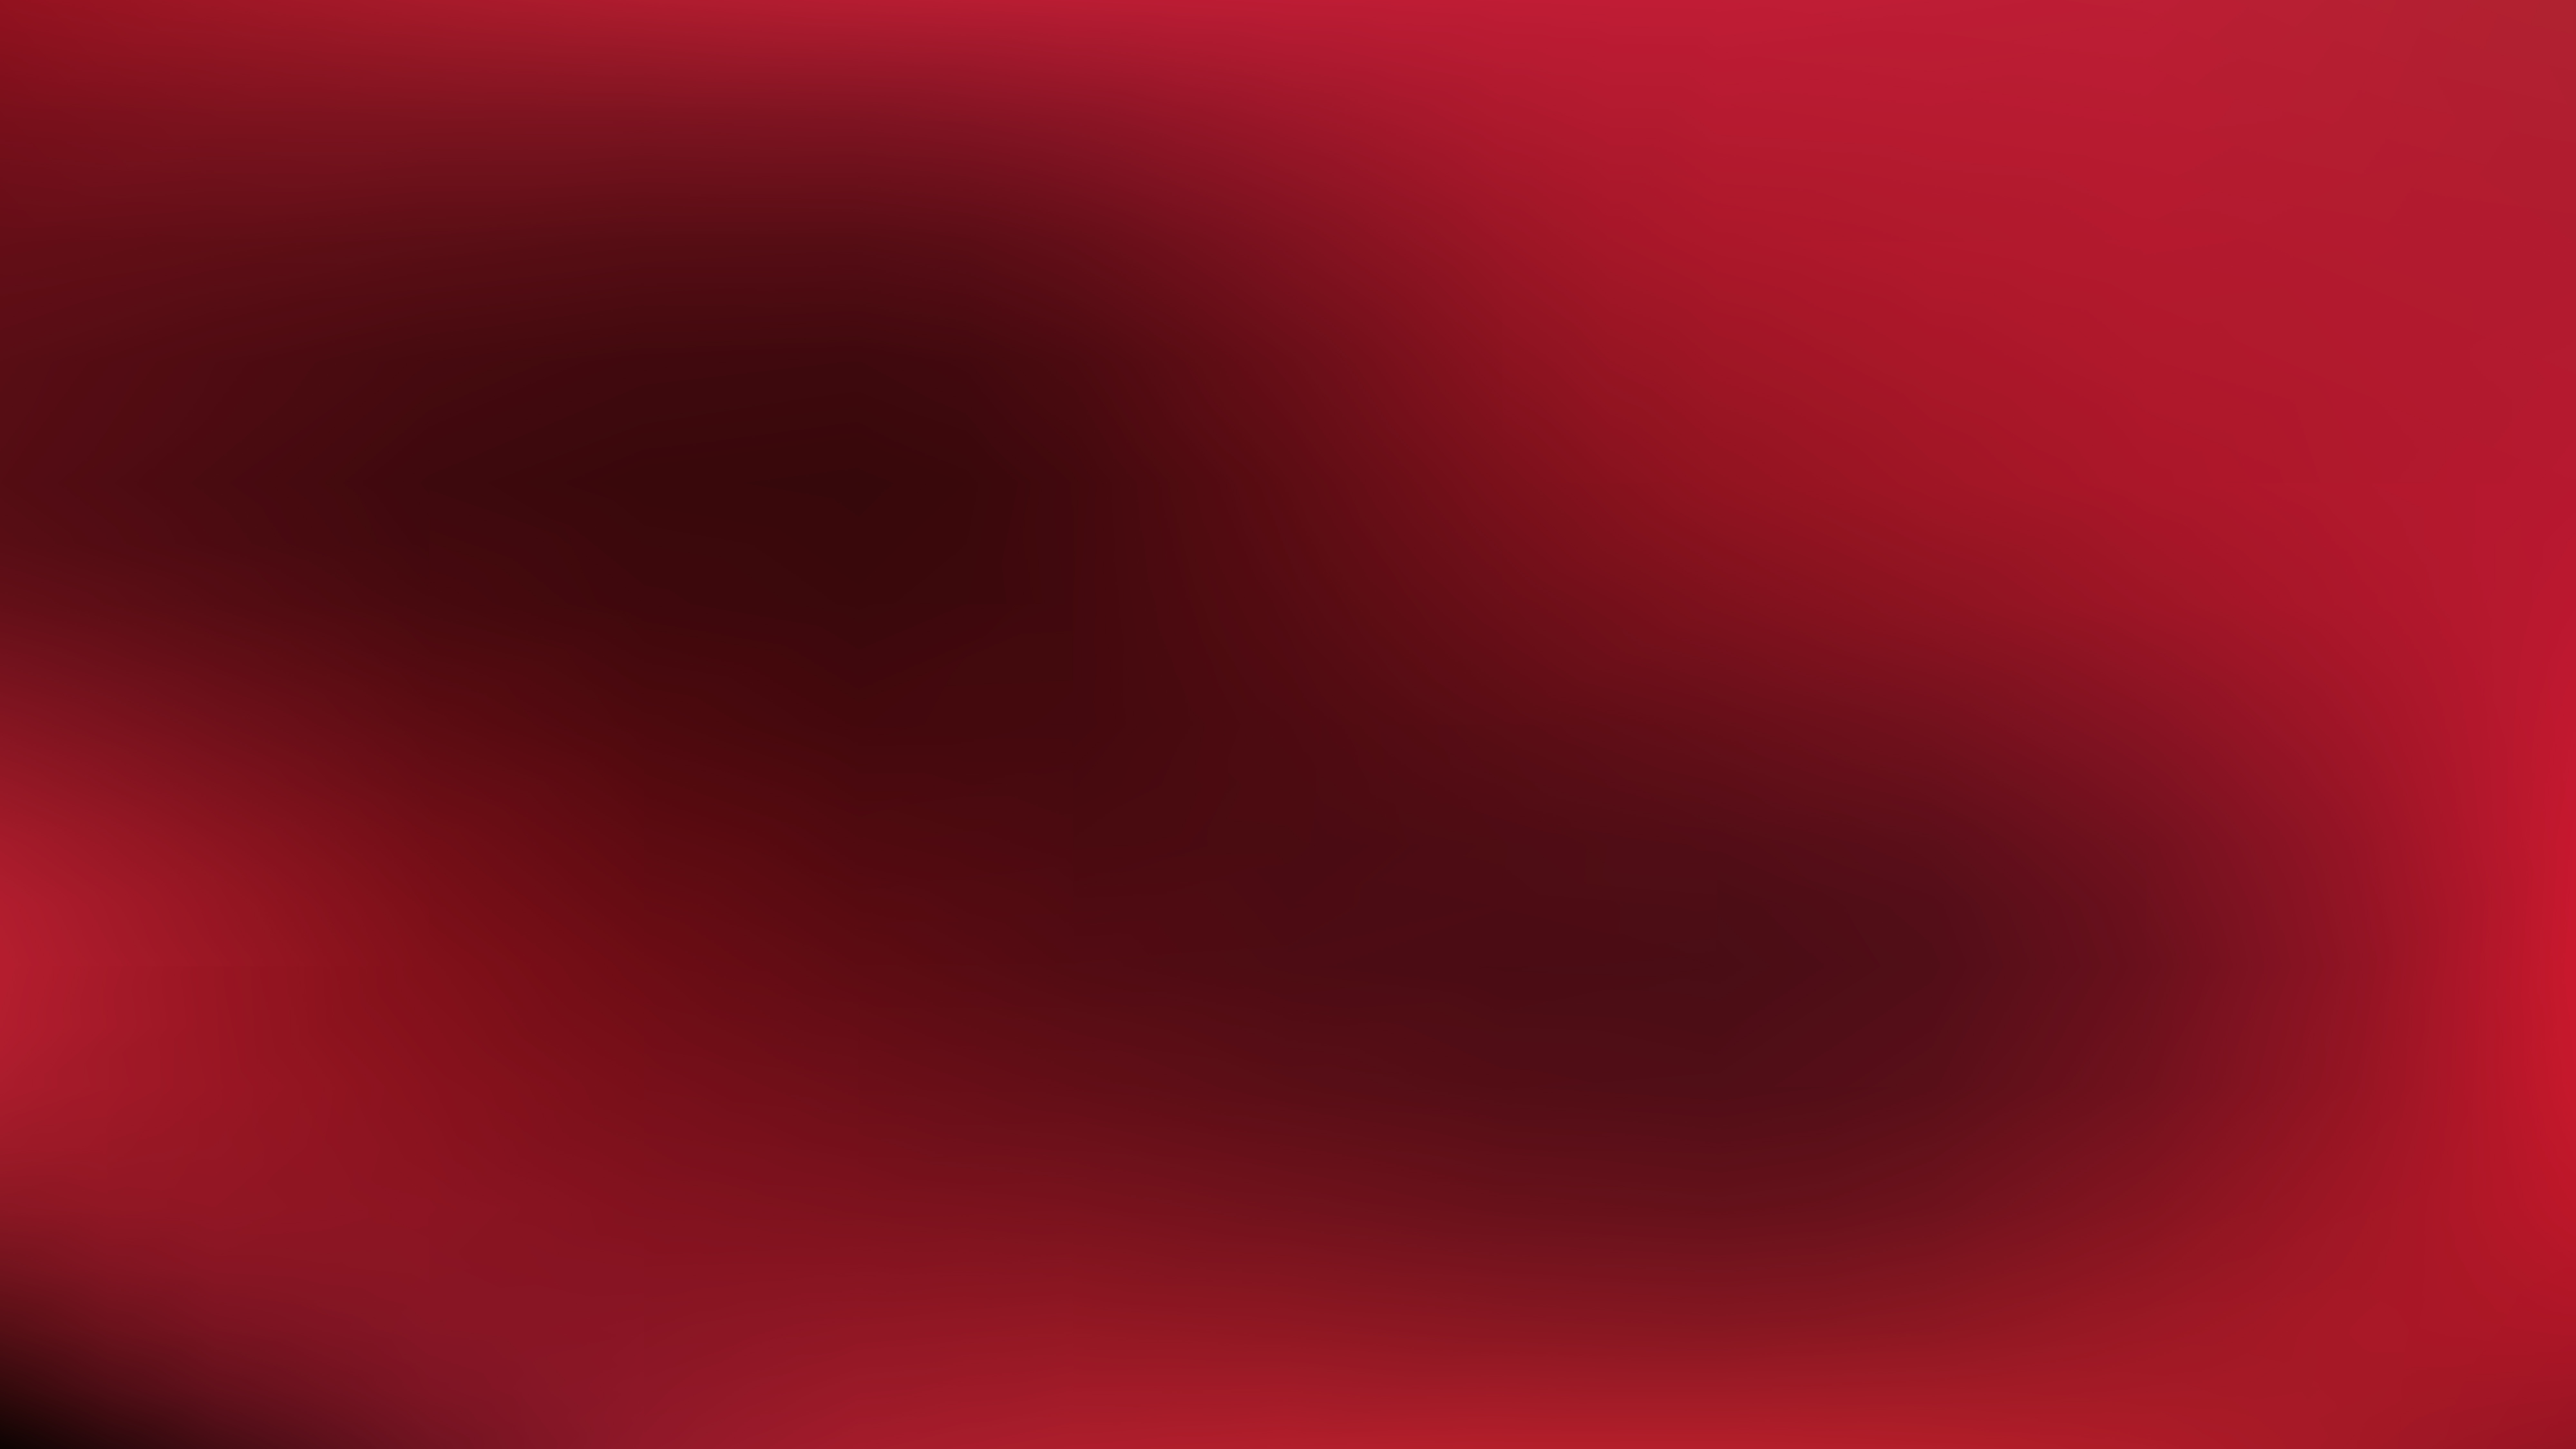 Red And Black Blur Photo Wallpaper Graphic - Black And Red Blur Background - HD Wallpaper 